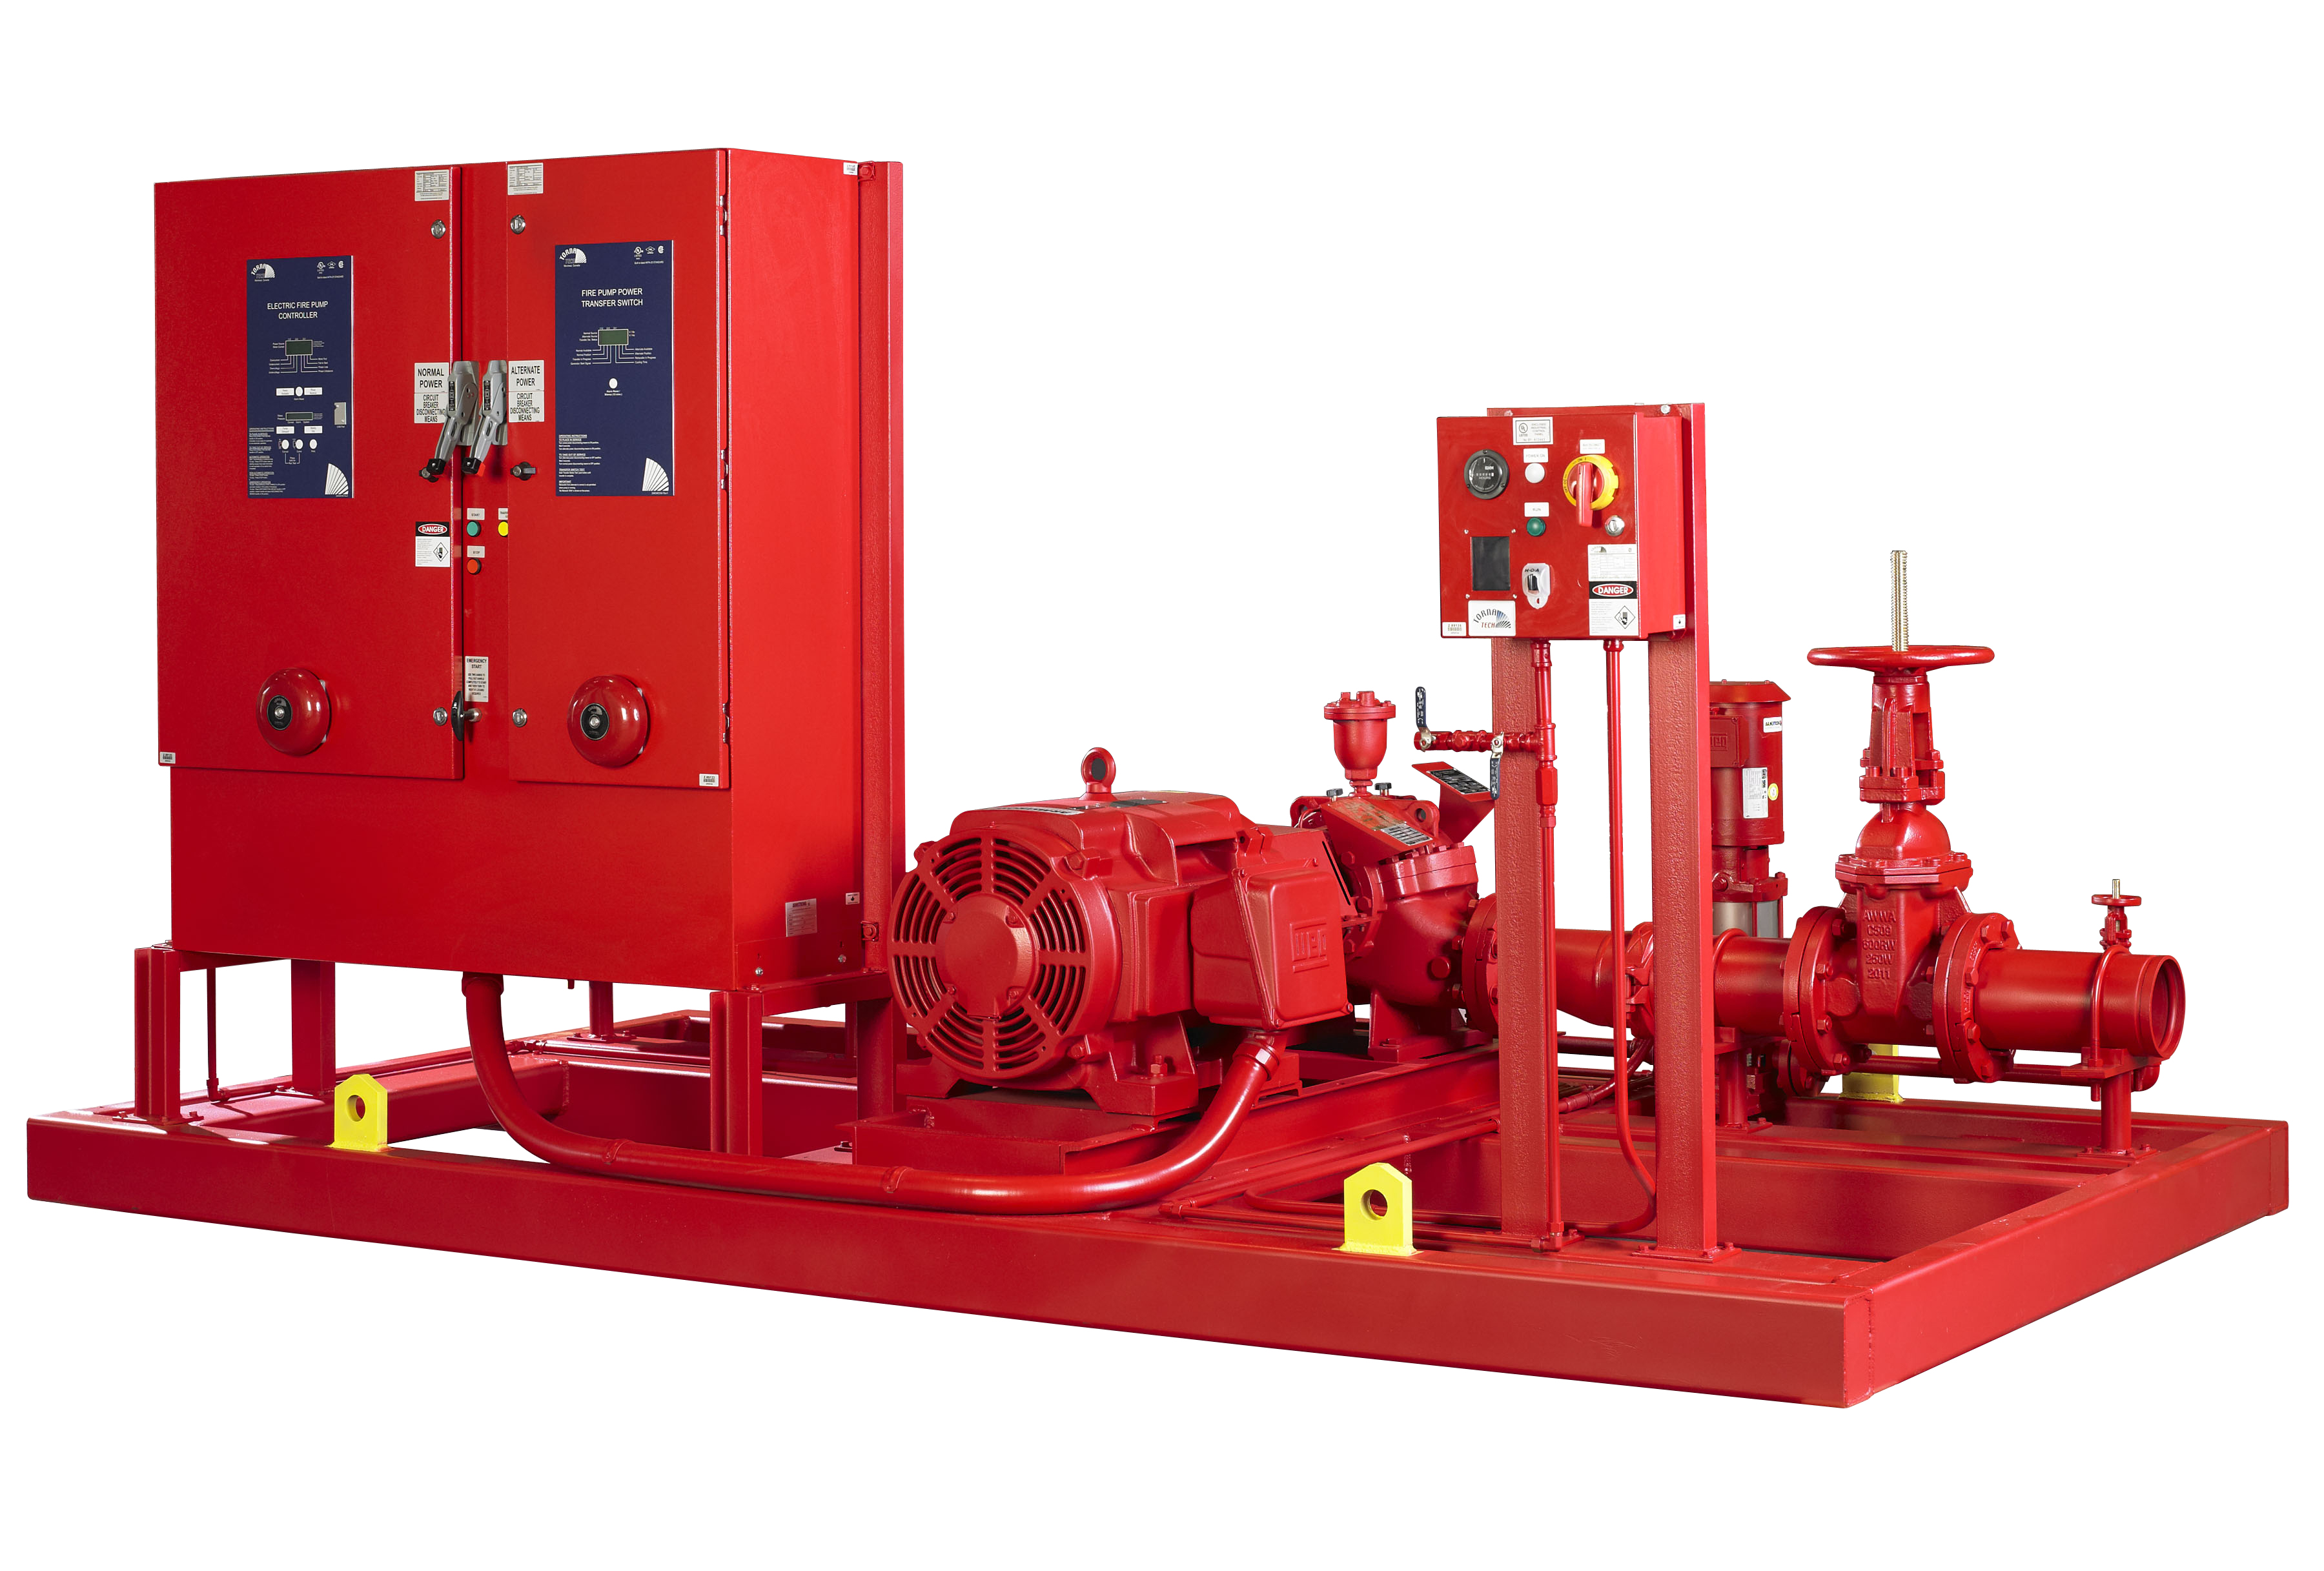 The enhanced Armstrong Fluid Technology HSC Firepak™ is a completely integrated, fully-packaged fire pump solution that provides both designers and contractors with a unique set of advantages. The innovative “Plug and Play” design allows fast and easy installation.